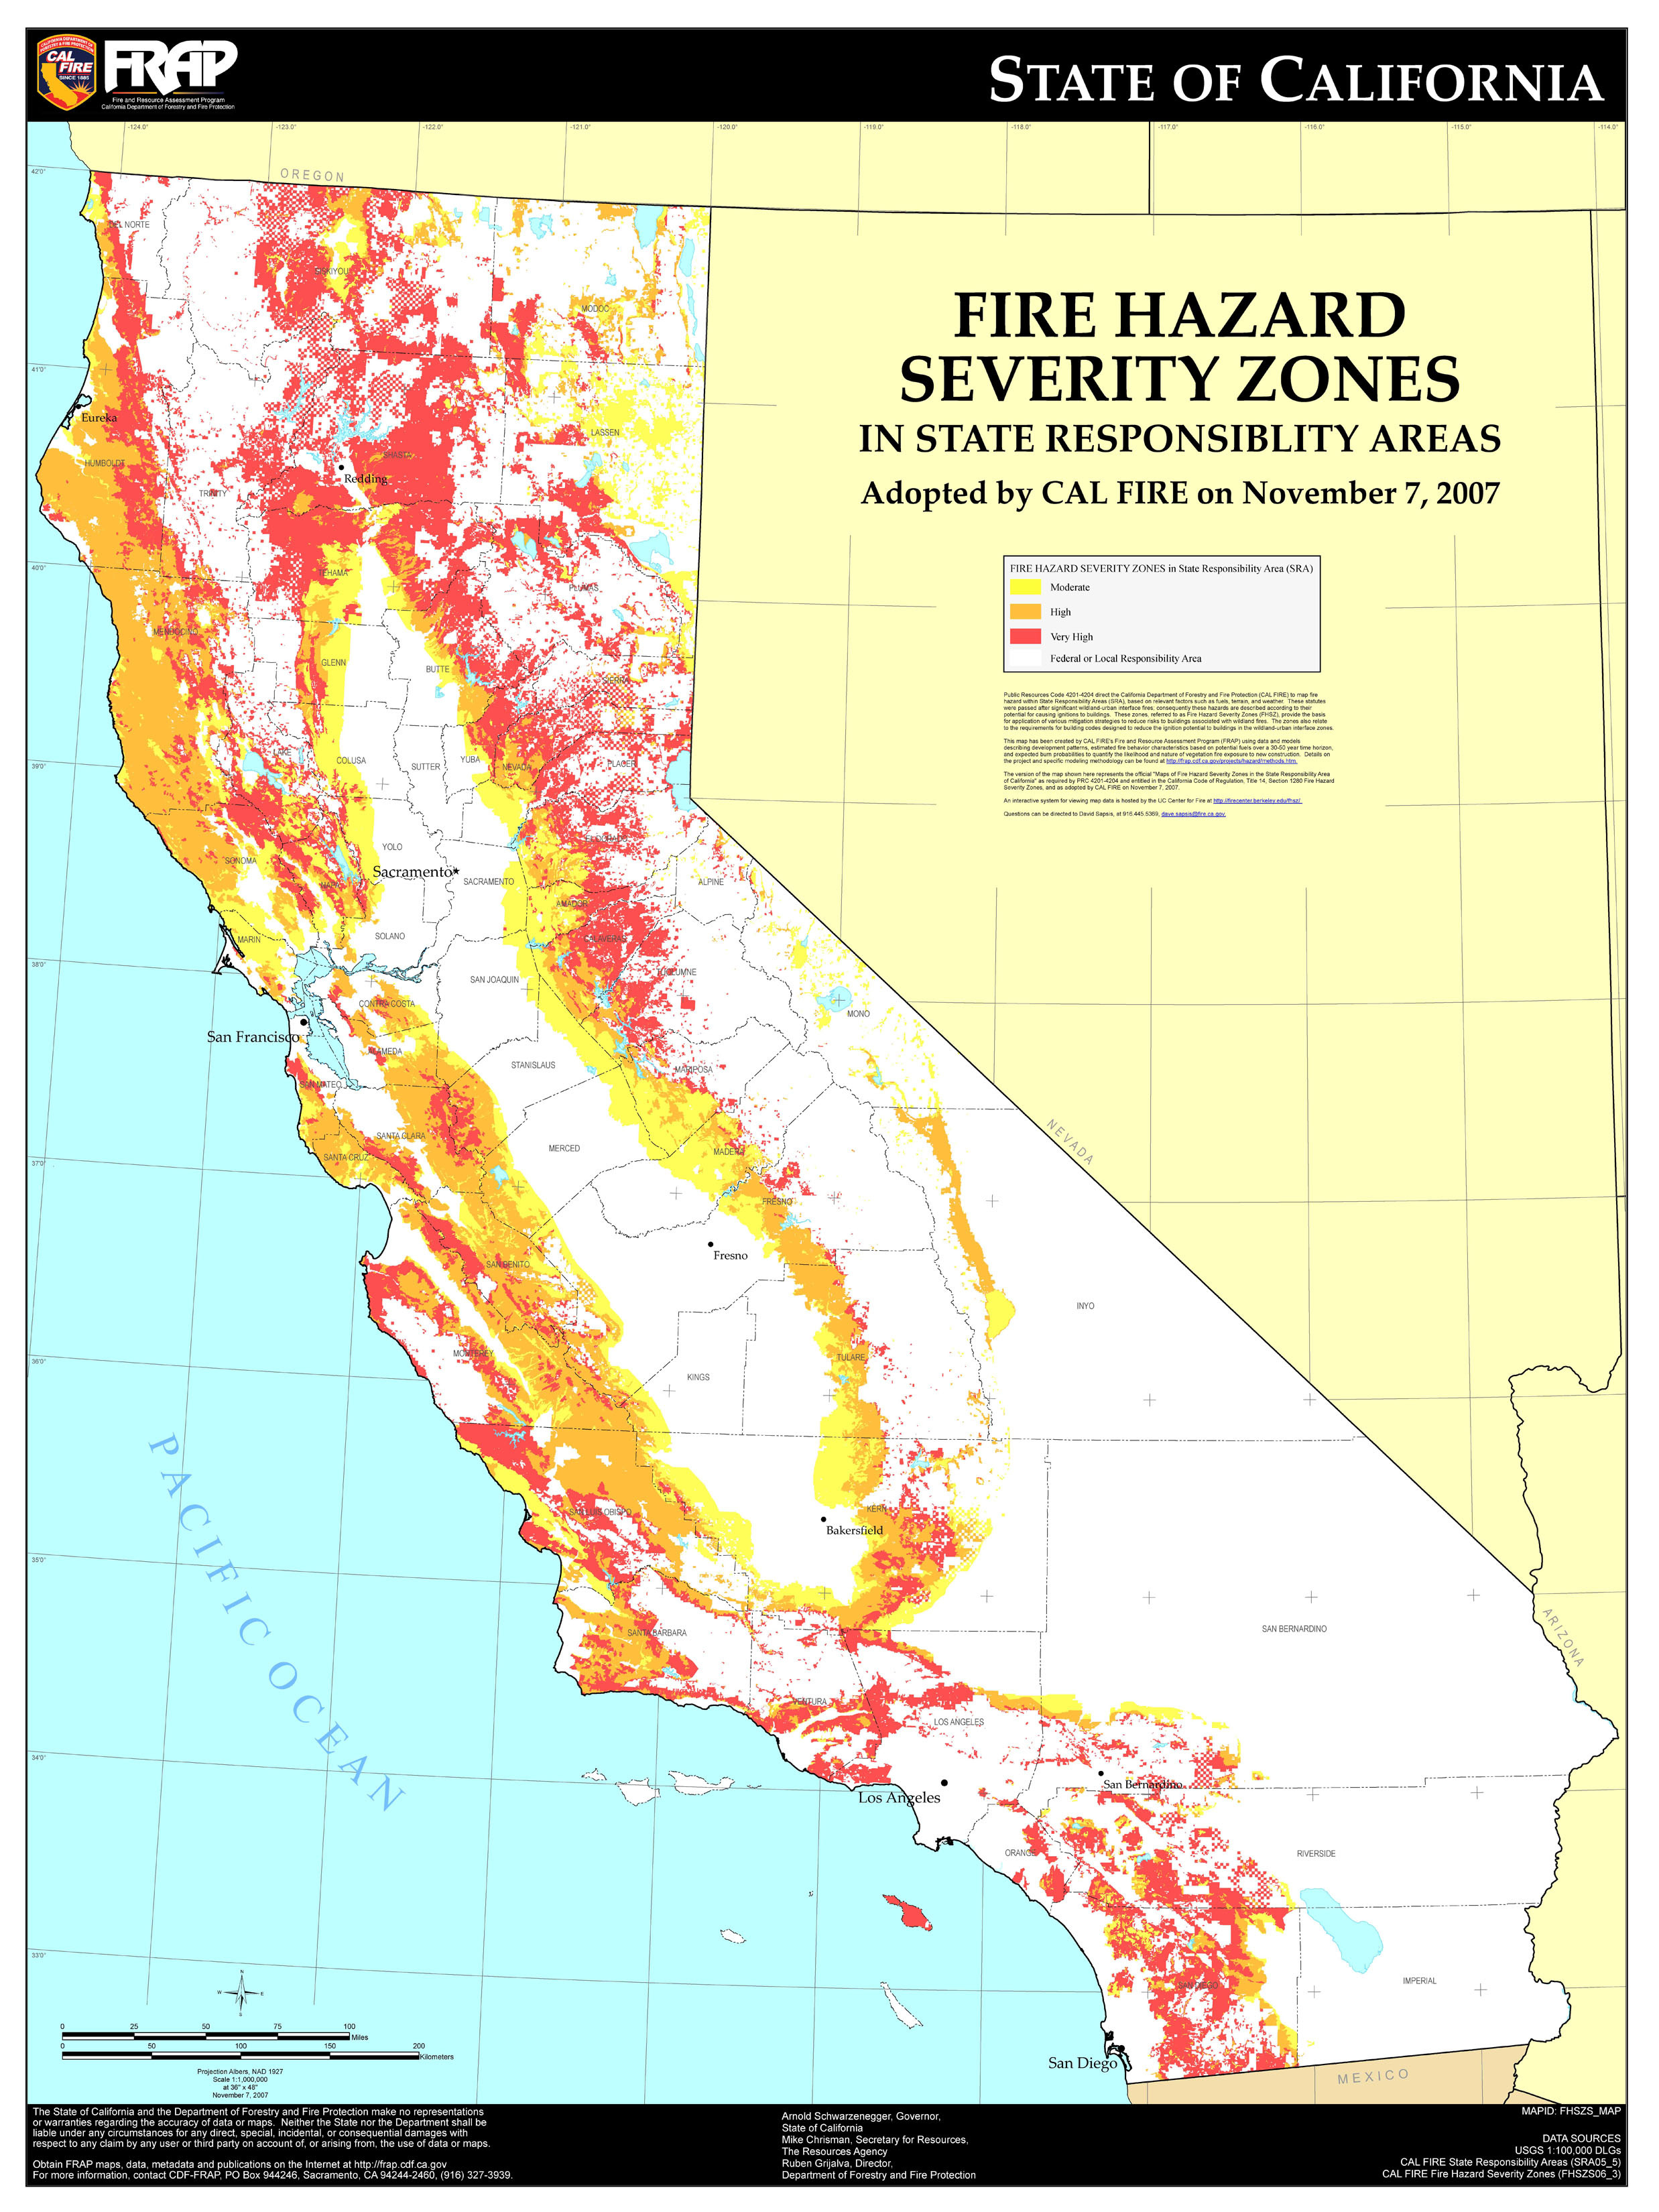 Fires In California Right Now Map Outline Current Fires In - Map Showing Current Fires In California